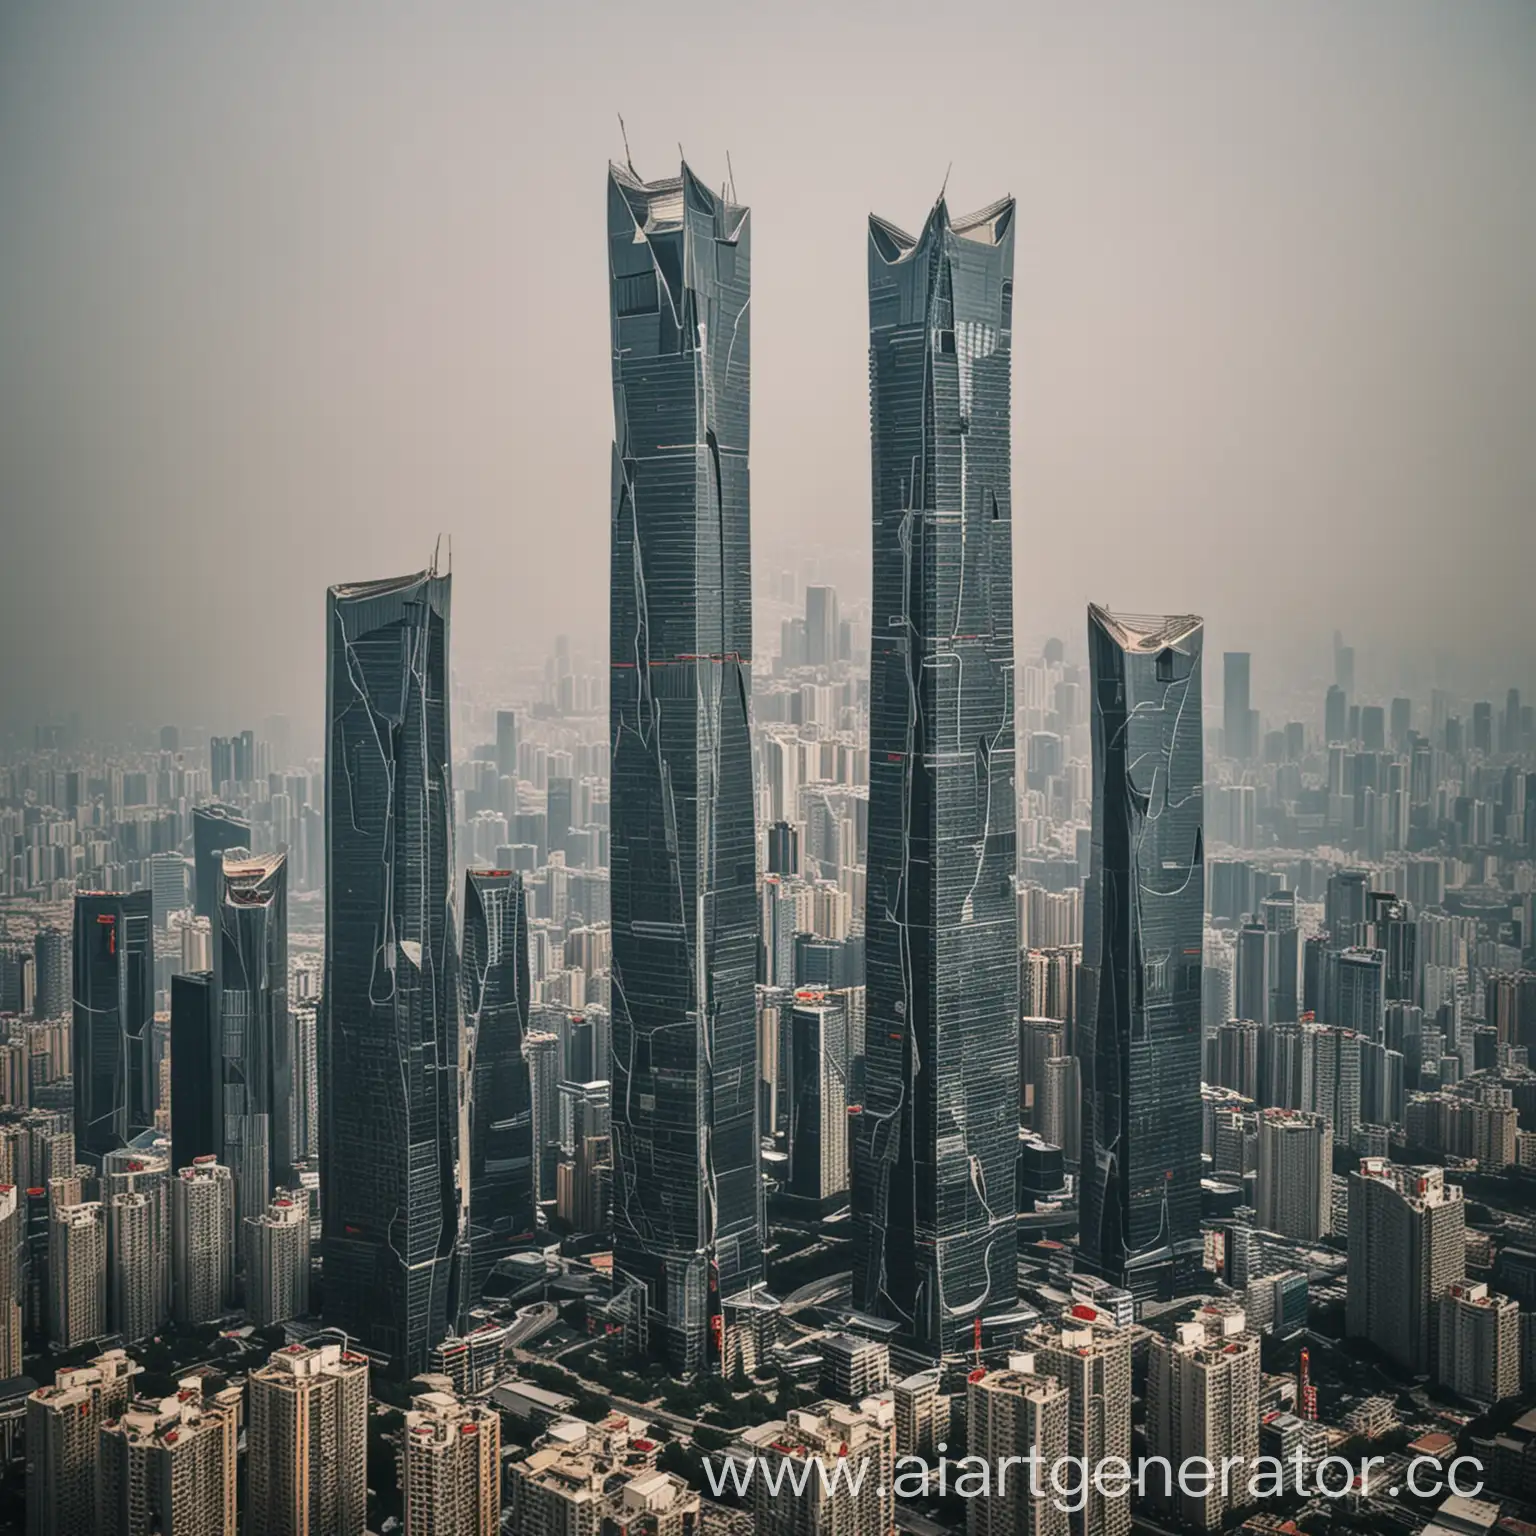 Modern-Skyline-Spectacular-Chinese-Skyscrapers-Towering-Amidst-Urban-Landscape